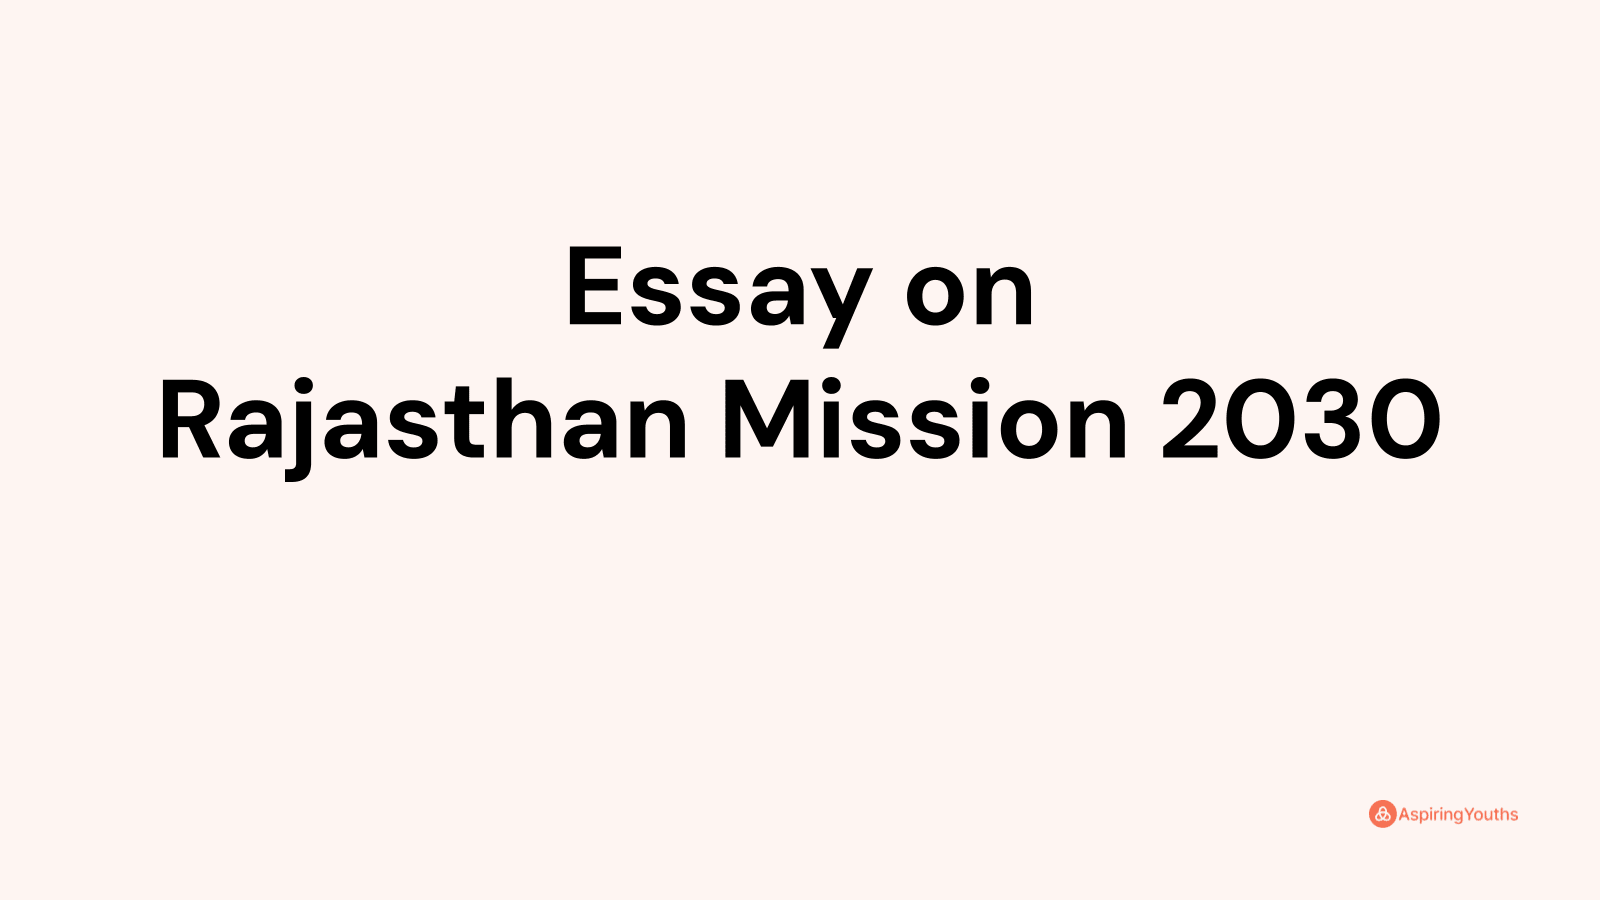 rajasthan mission 2030 essay in english 300 words